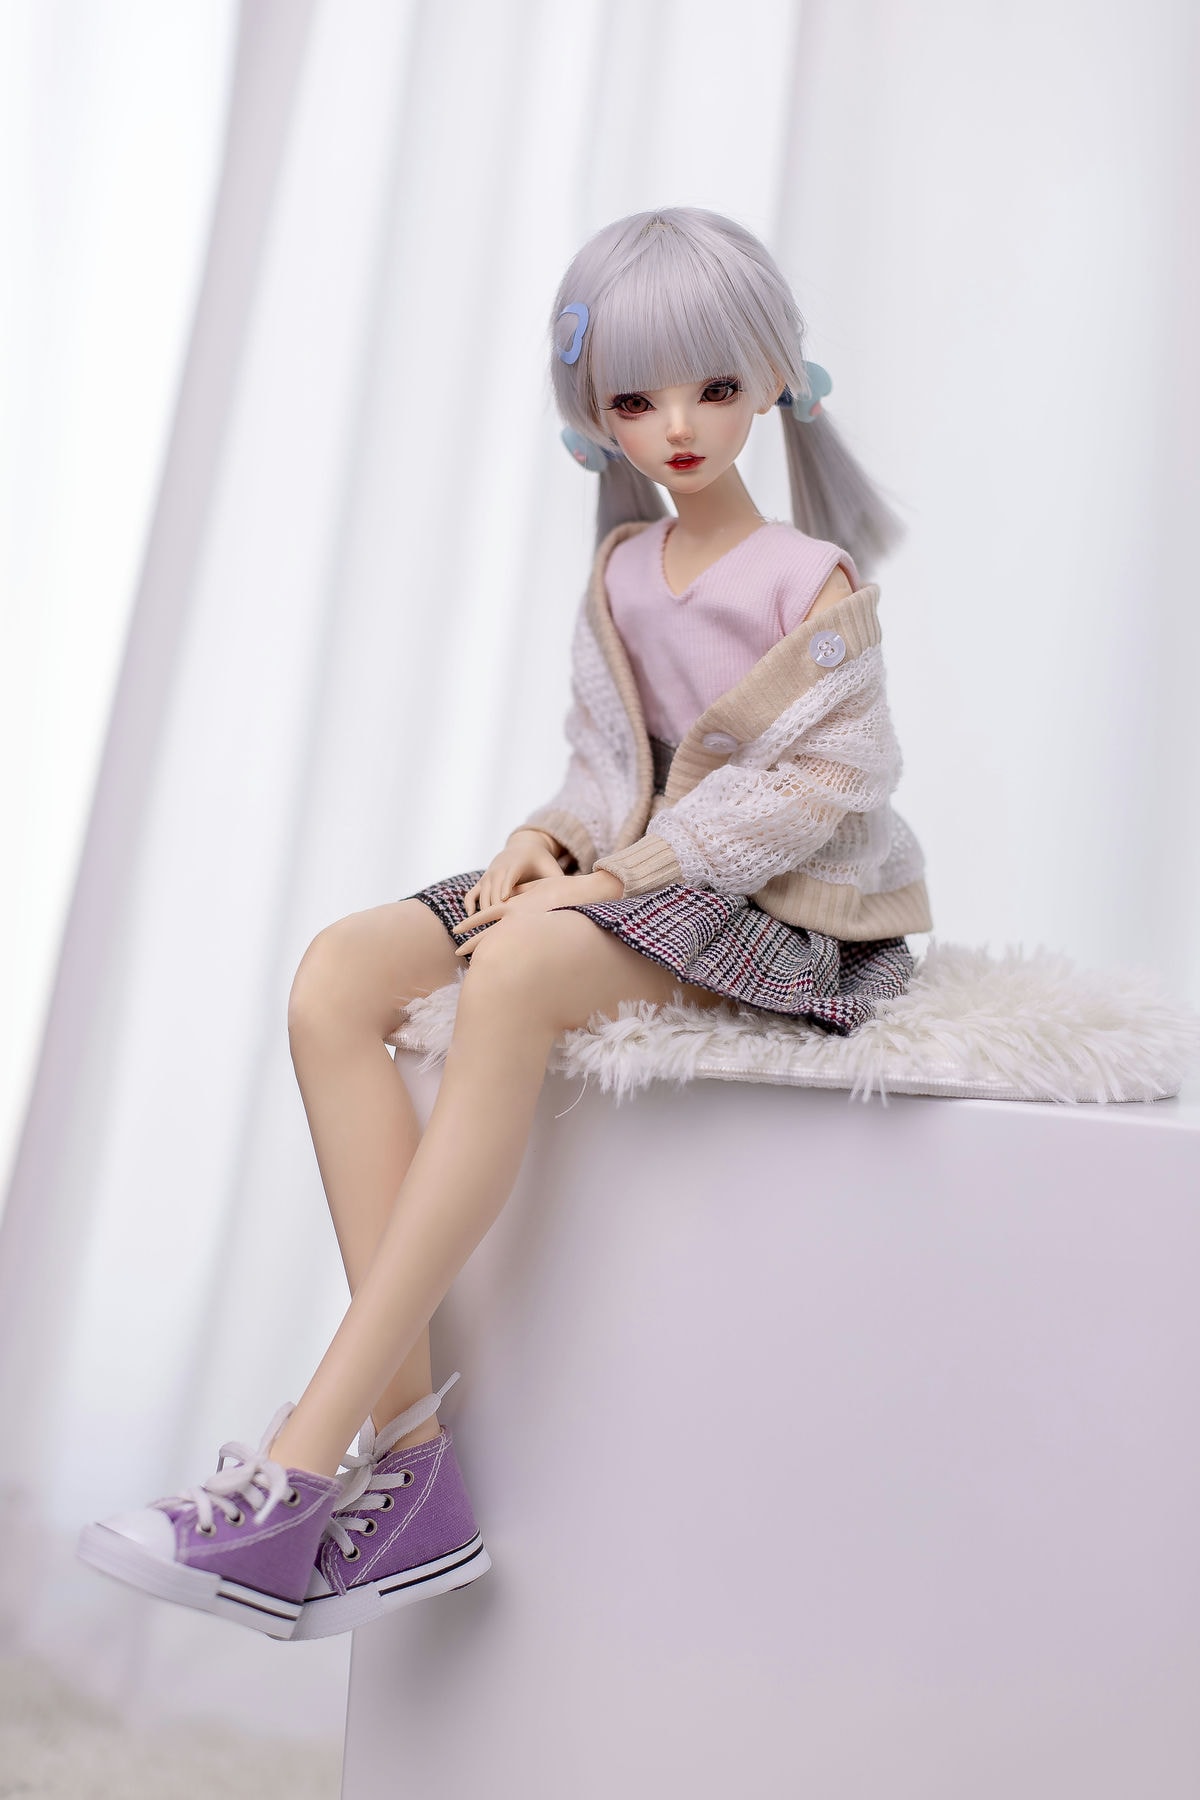 Pearl – 2ft3(68cm) Cute Tiny Sex Doll With BJD Head